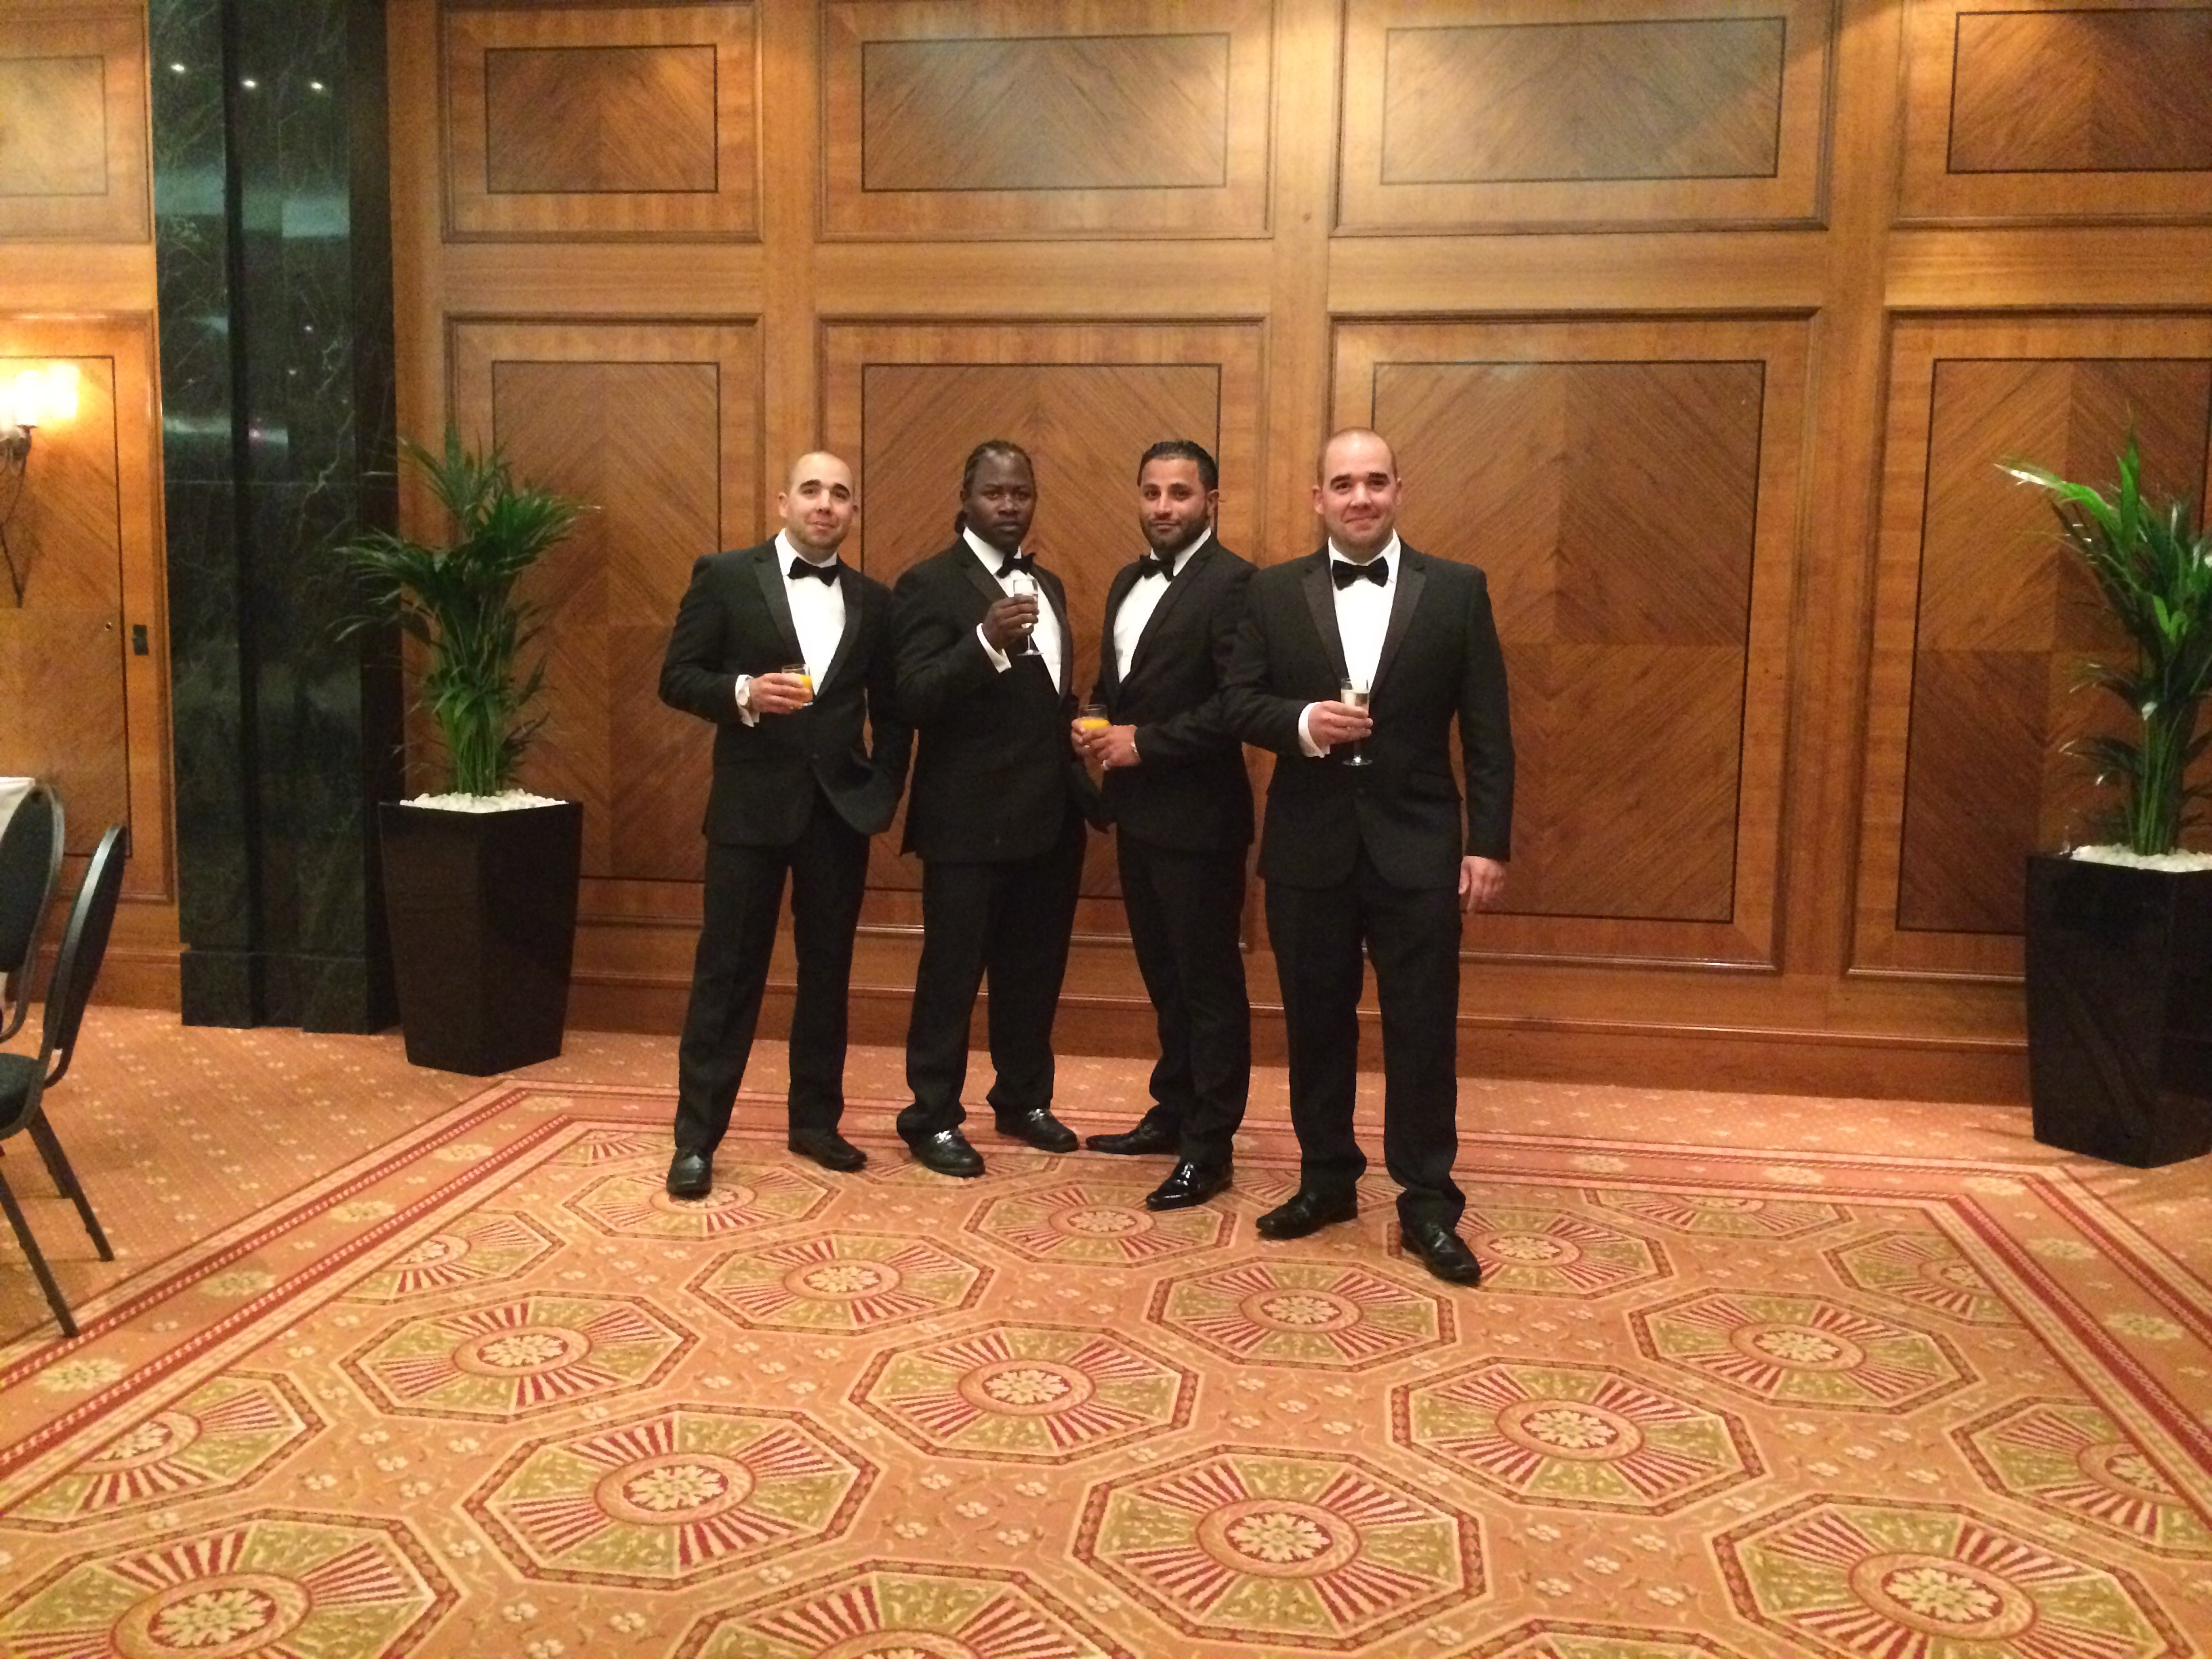 2014 Media Awards London with Actors (from left to right) Gerald Horler,Carlos Hewings,Thaer Al-Shayei & Rhys Horler.